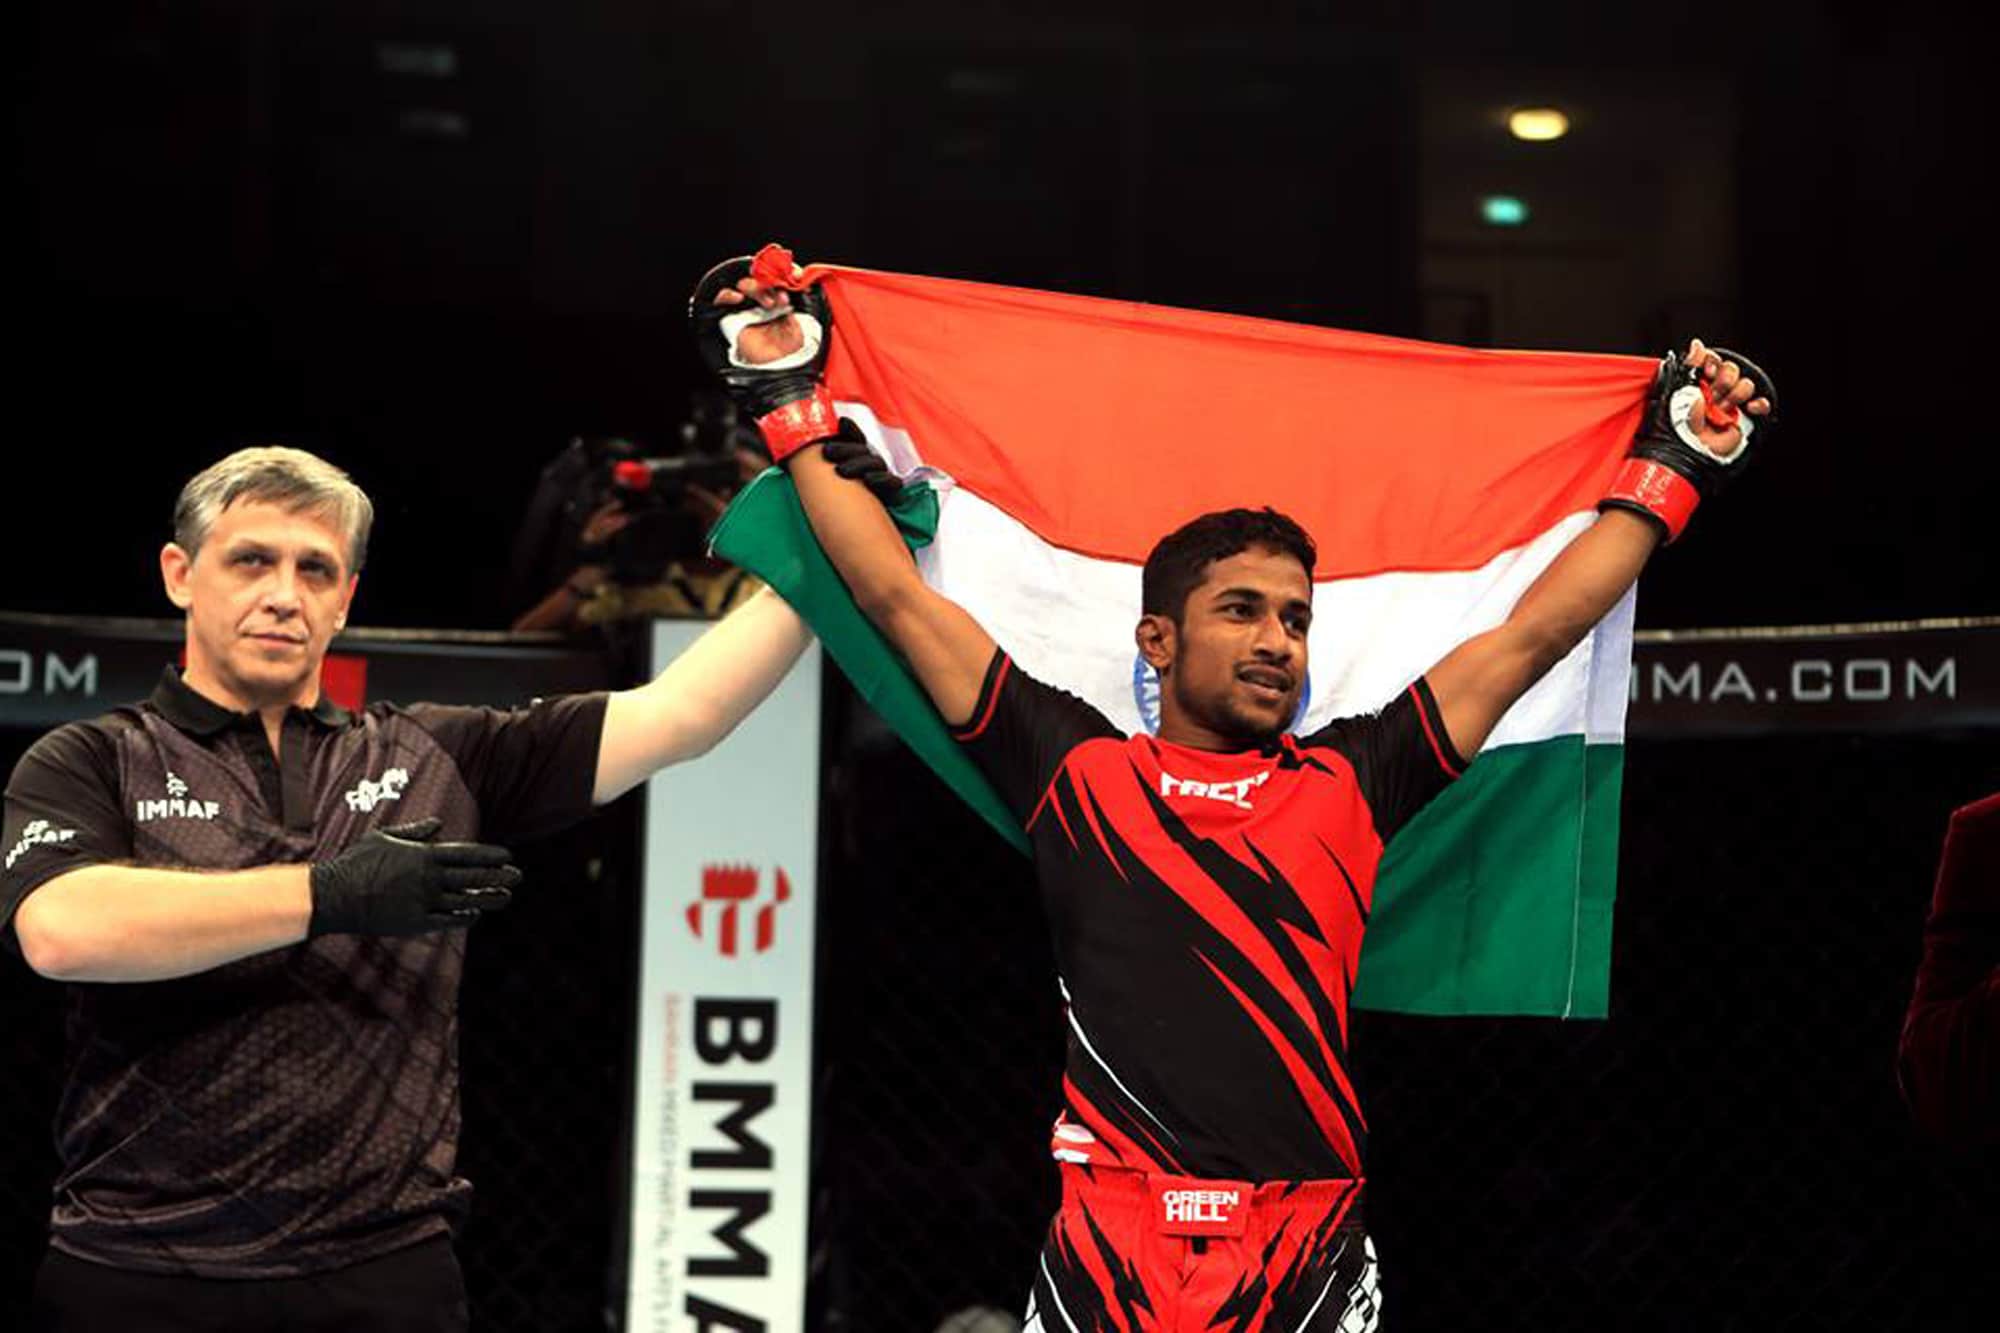 Indian MMA Open event gives athletes new chance to compete and serves as qualifier for IMMAF World Championships